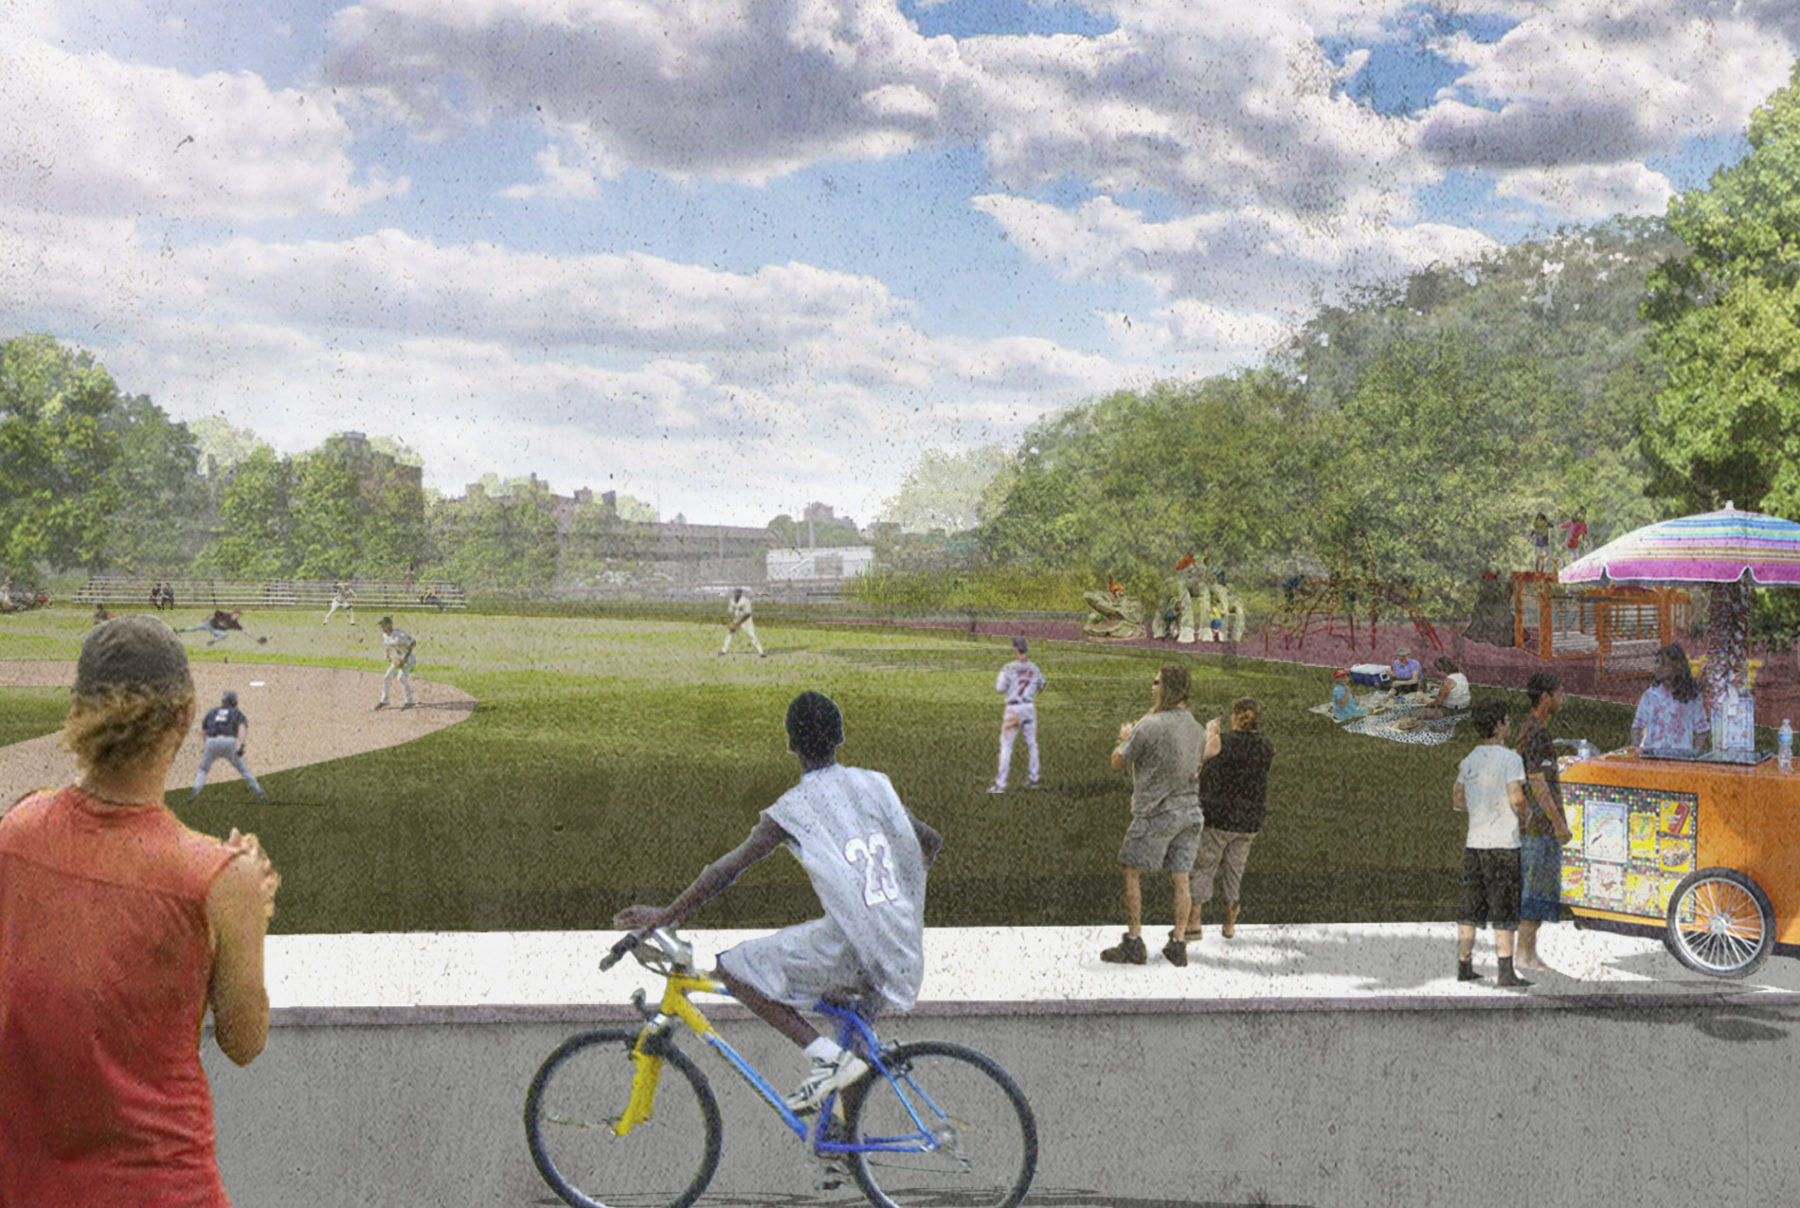 rendering of proposed design a boy on a bike rides in foreground